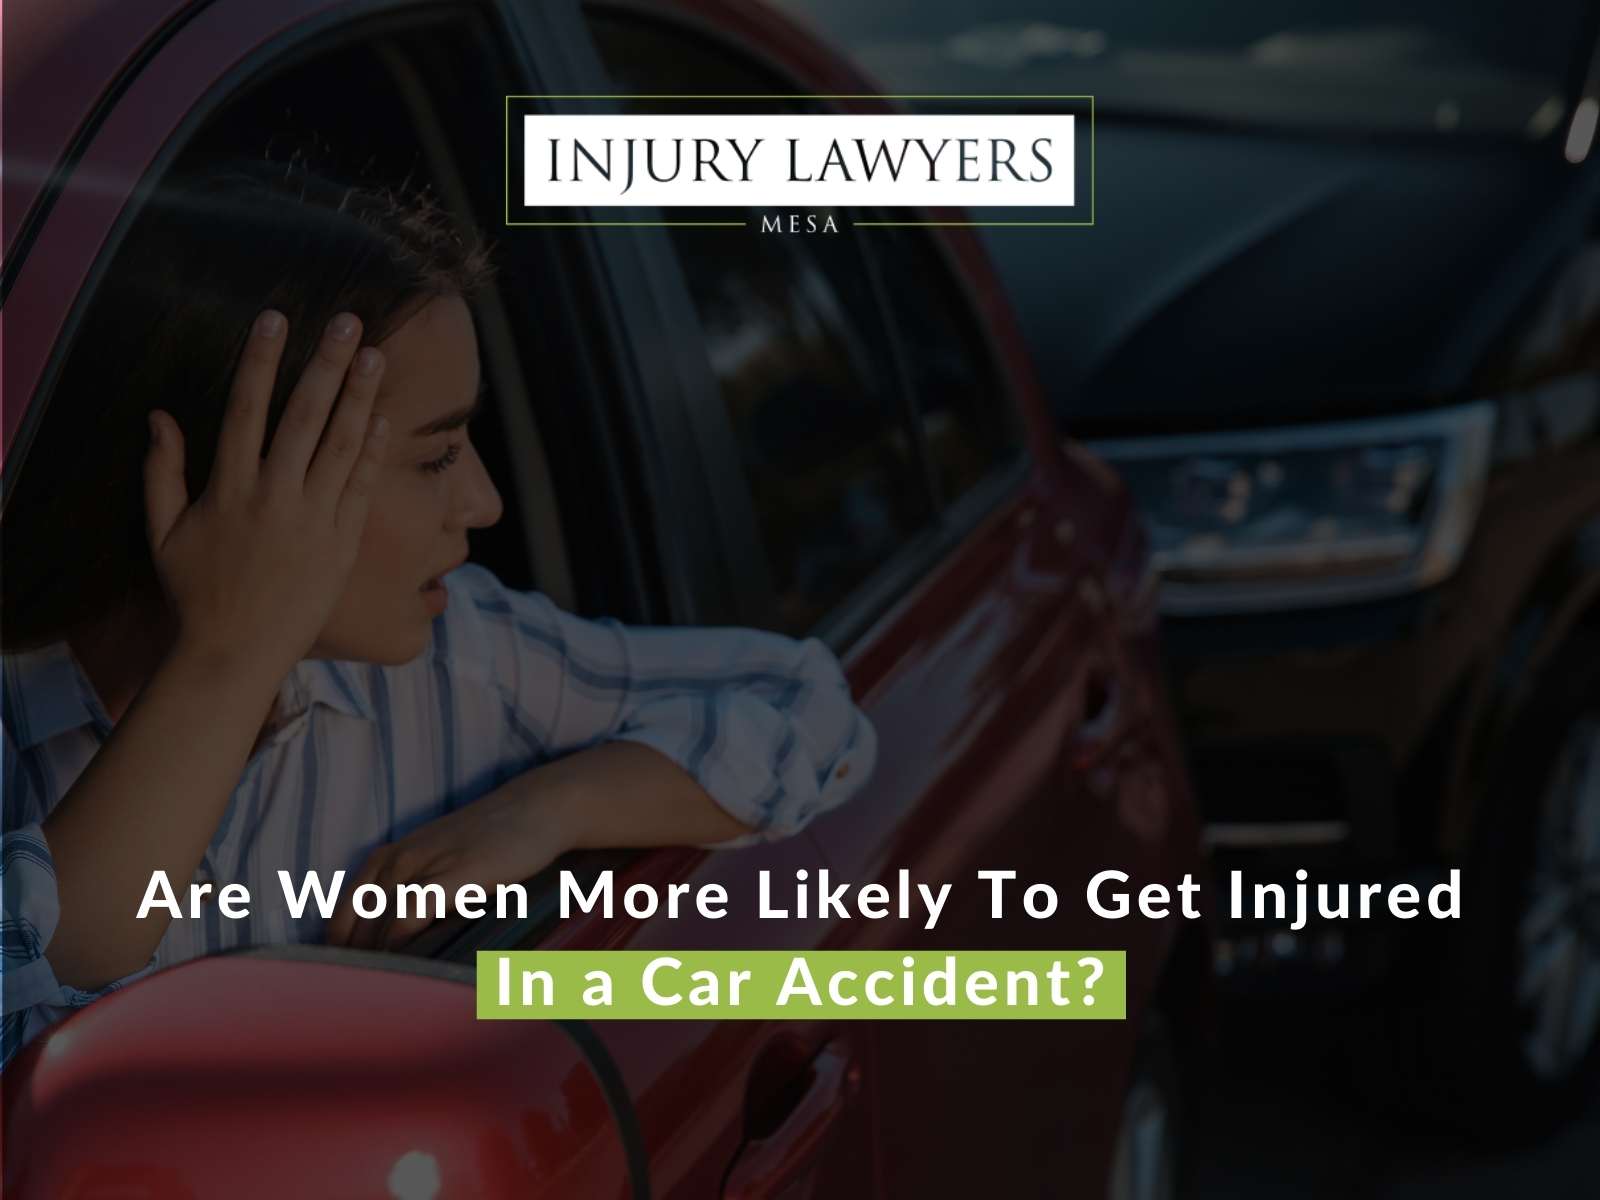 Are Women More Likely To Get Injured In a Car Accident